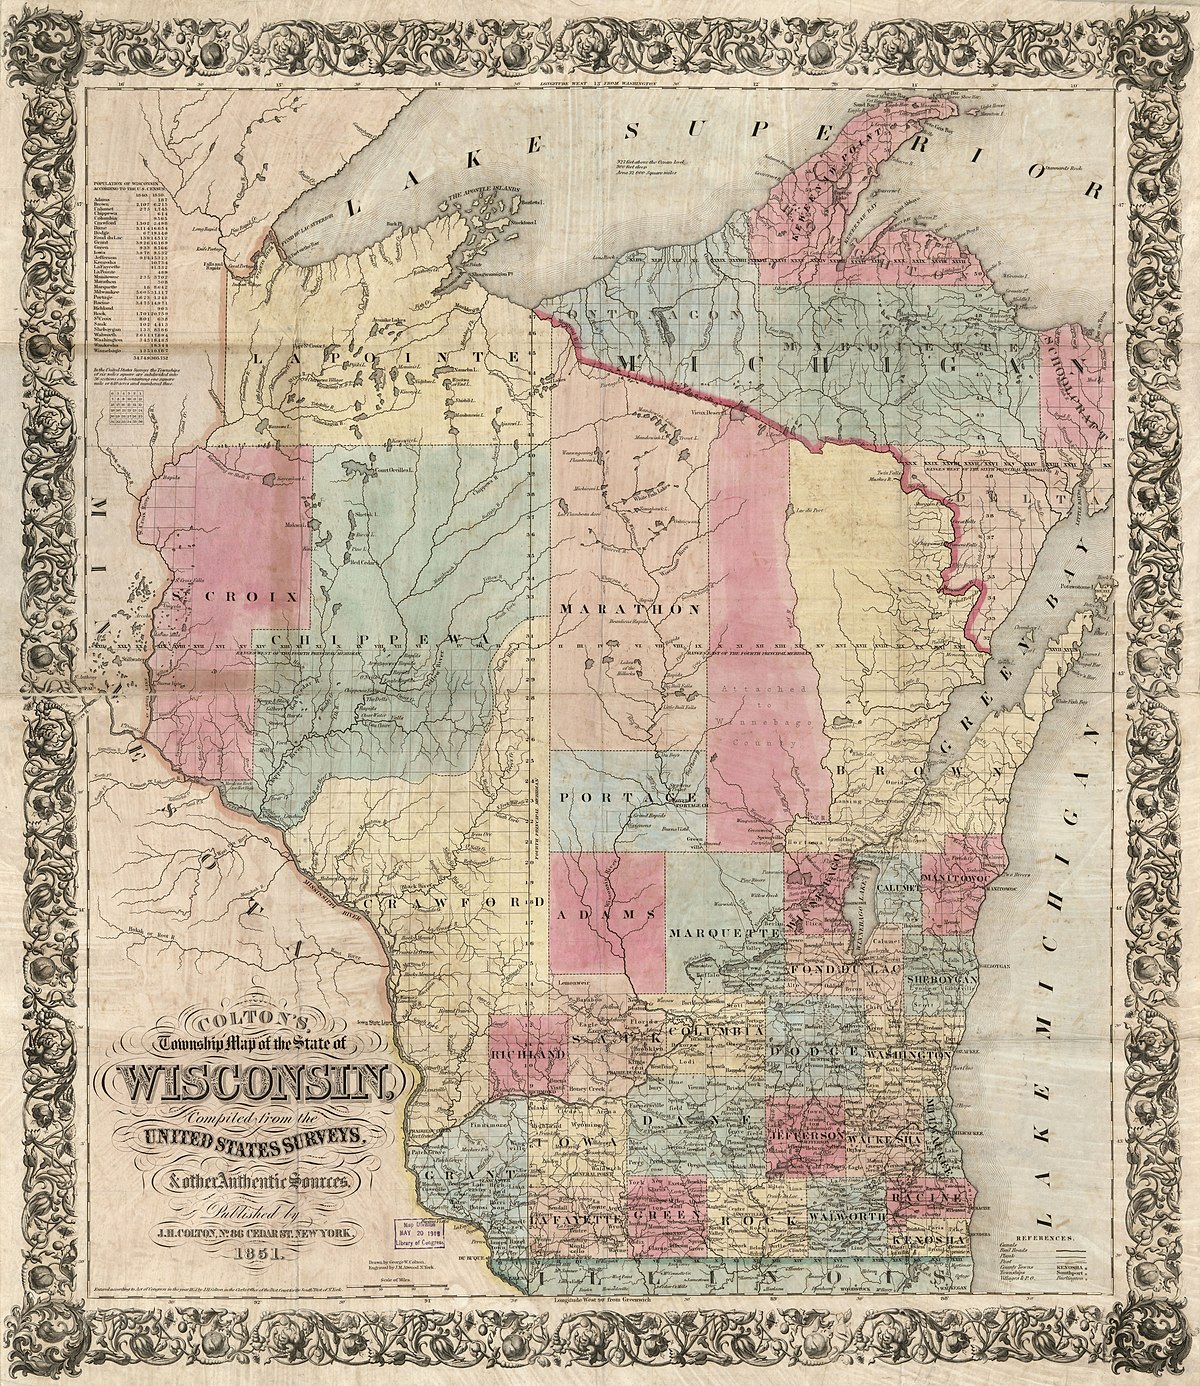 1851 boundaries of Brown County, prior to the separation of Door County in 1851